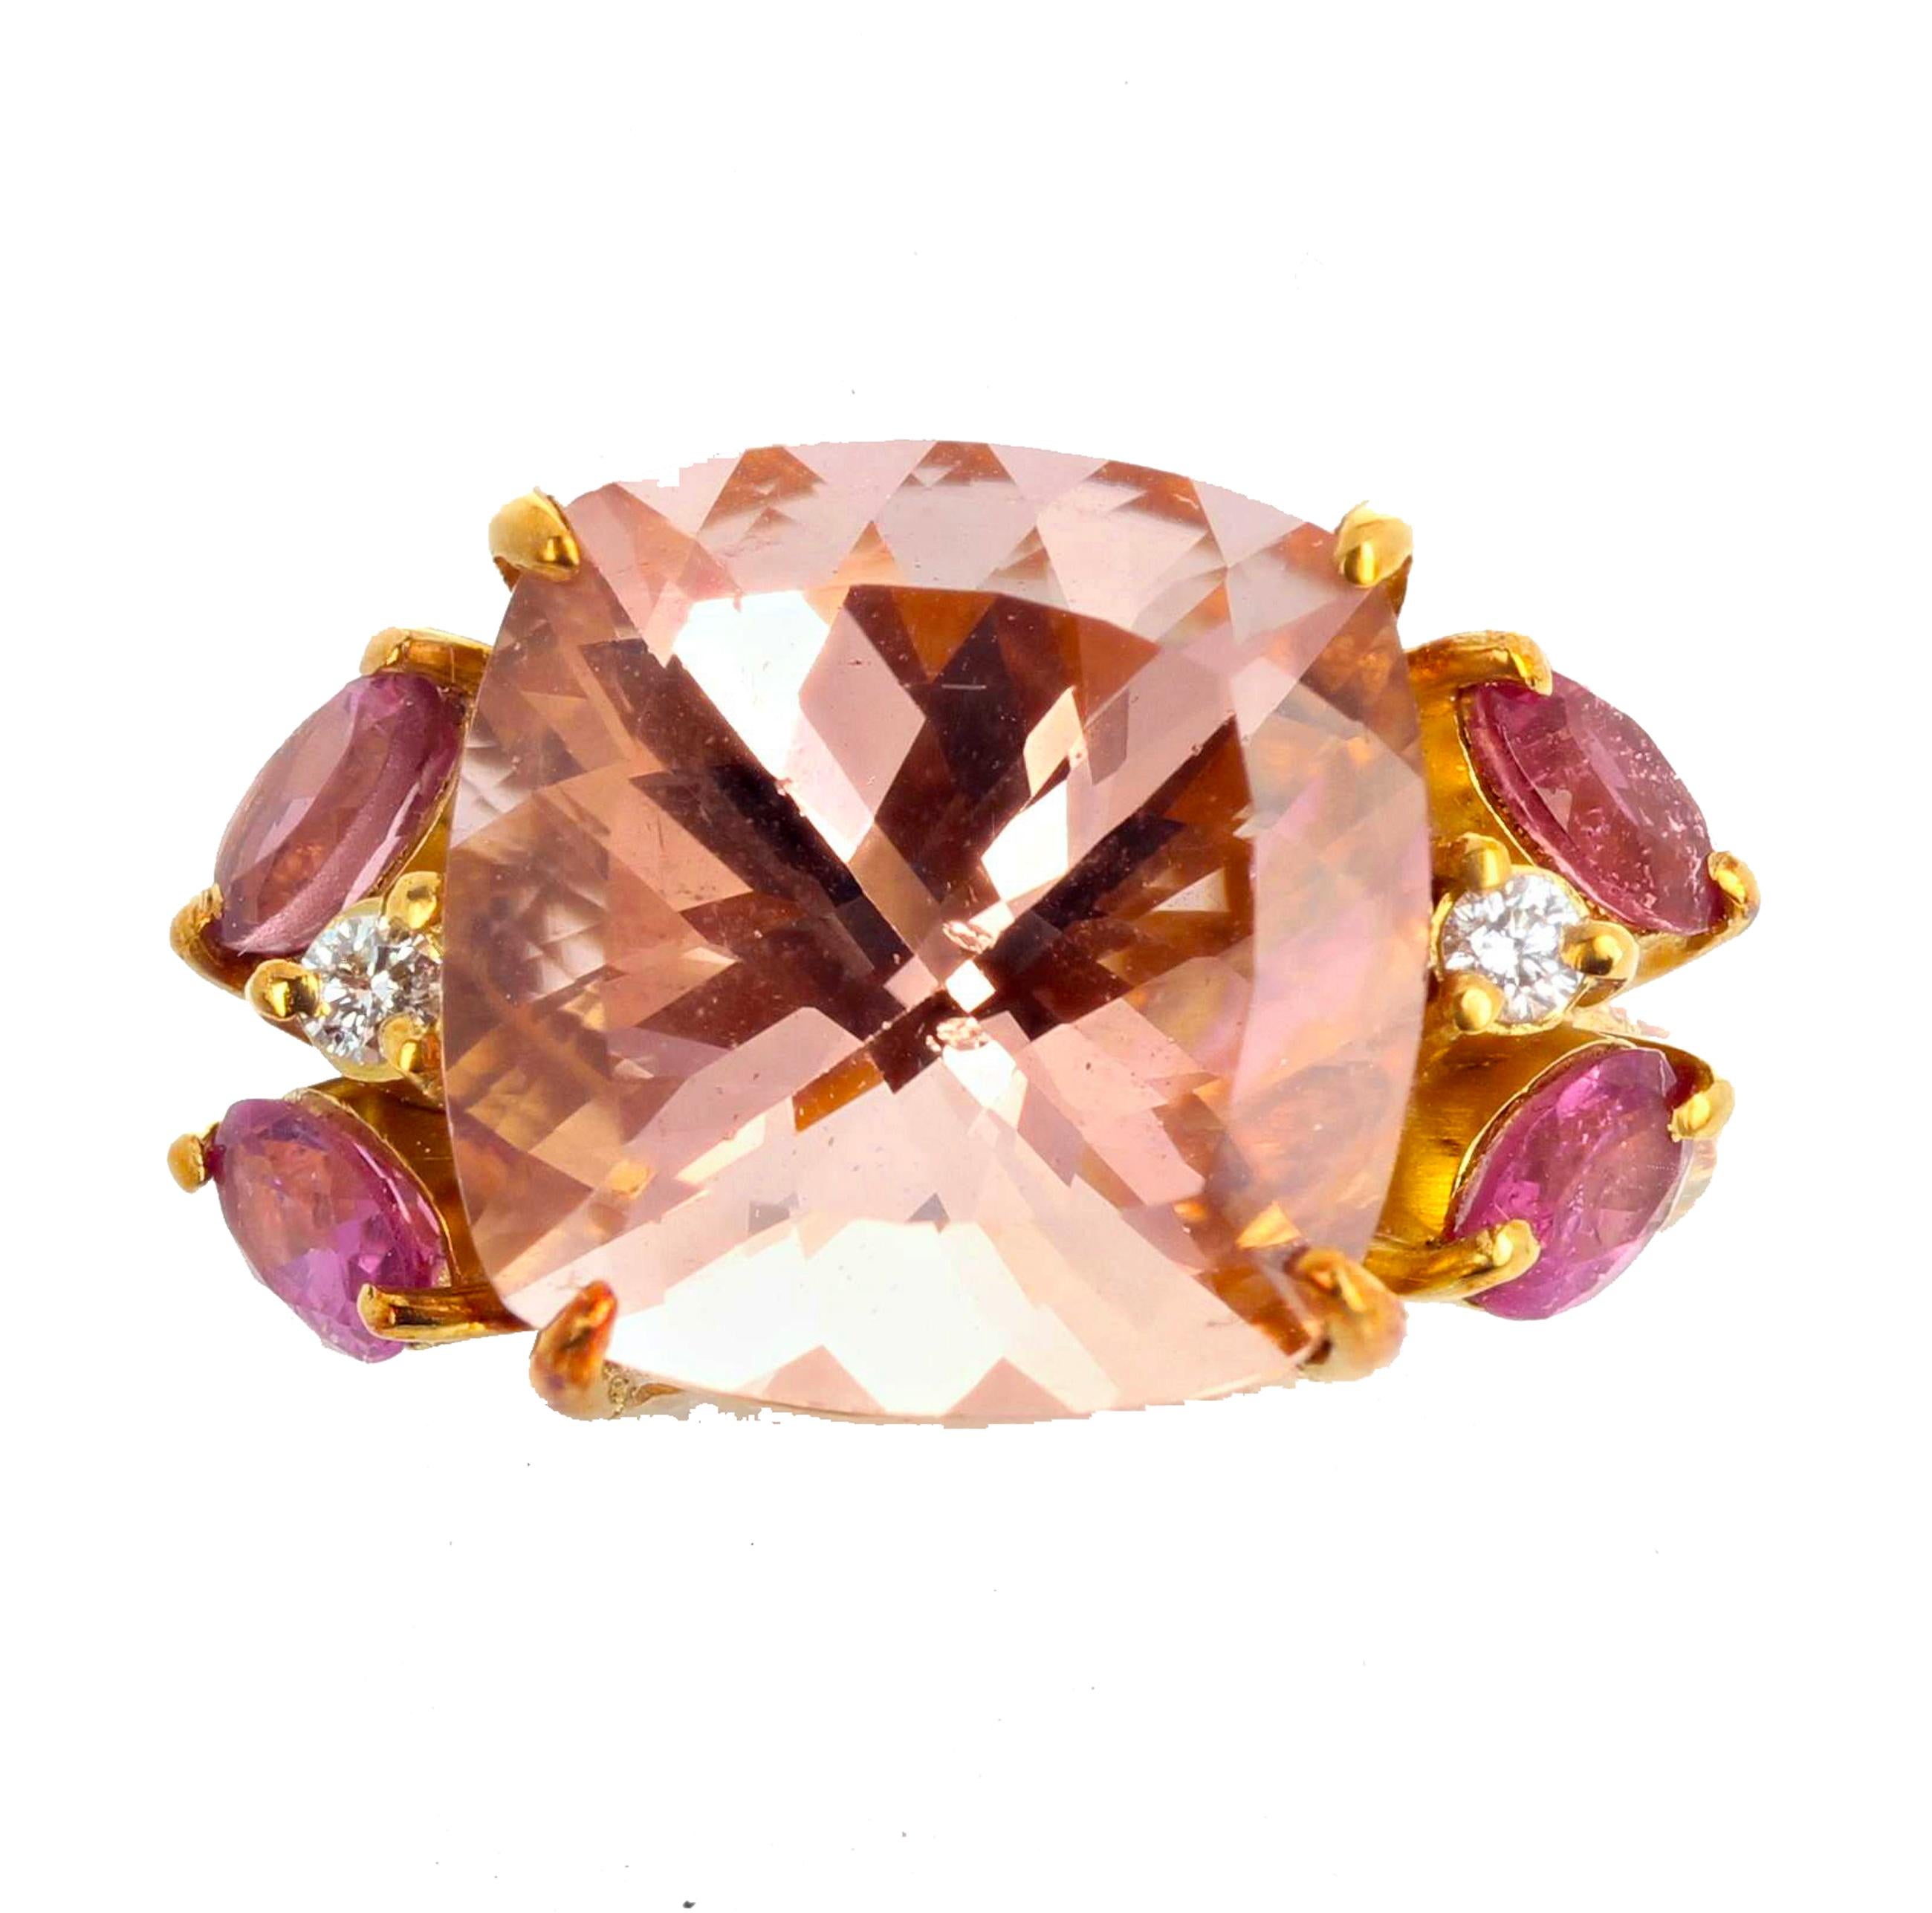 Magnificent matching set of unique glittering cushion cut Morganites (12 mm x 10 mm - 5.5 carats each) enhanced with brilliant pink Tourmalines  (7 mm x 7 mm - 1.5 carats each) set in 18KT yellow gold stud earrings.  Matching ring of glittering pink